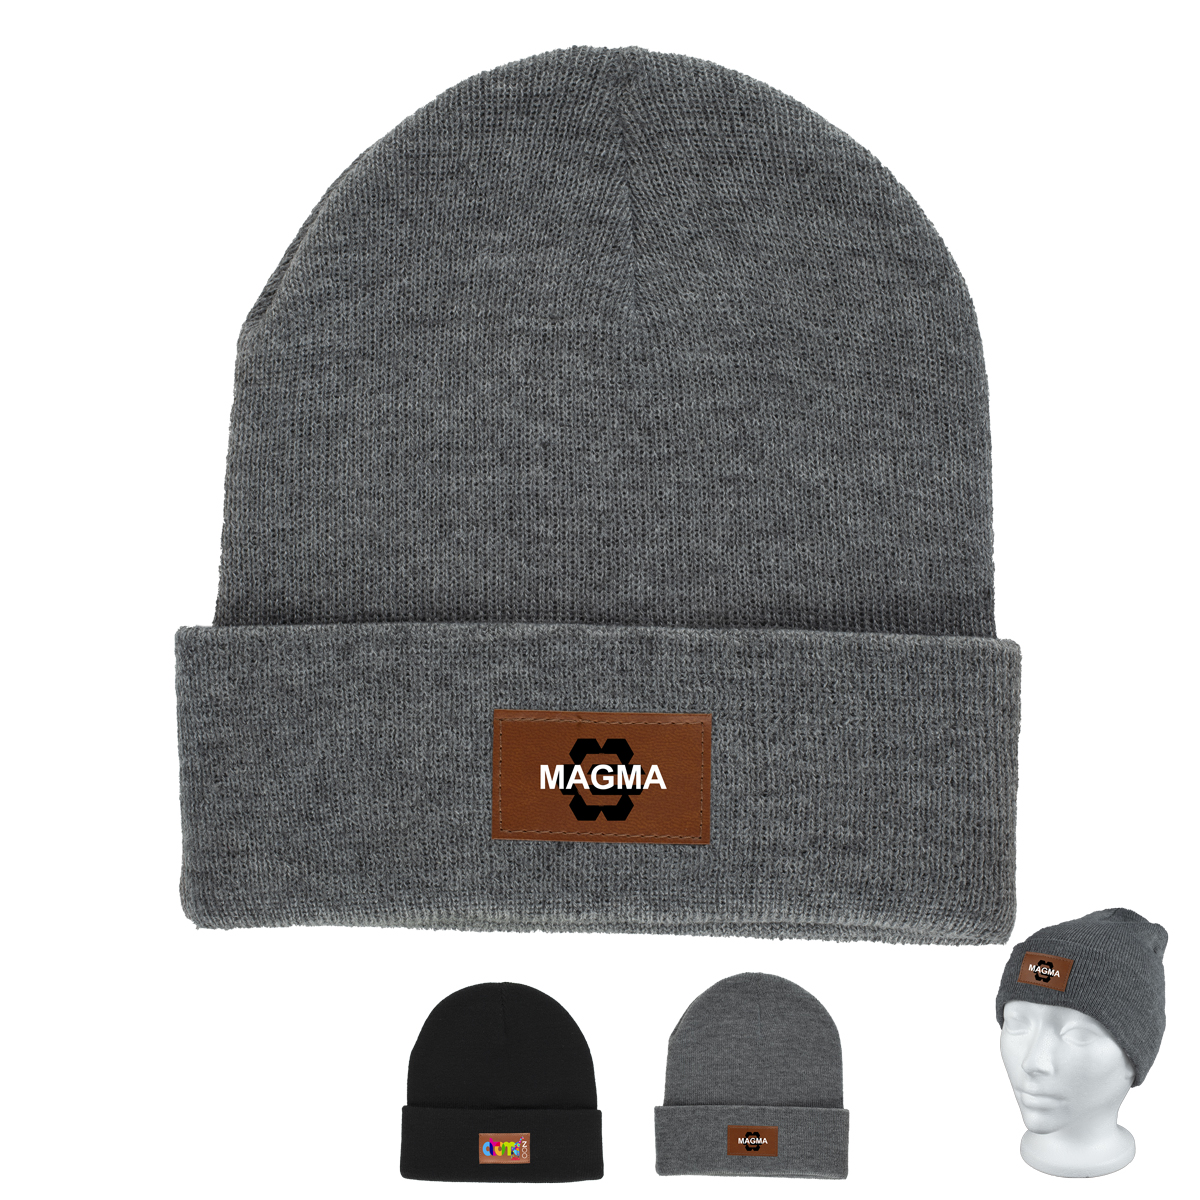 “TIBURION” Fashion and Performance Knit Cuffed Toque with Patch